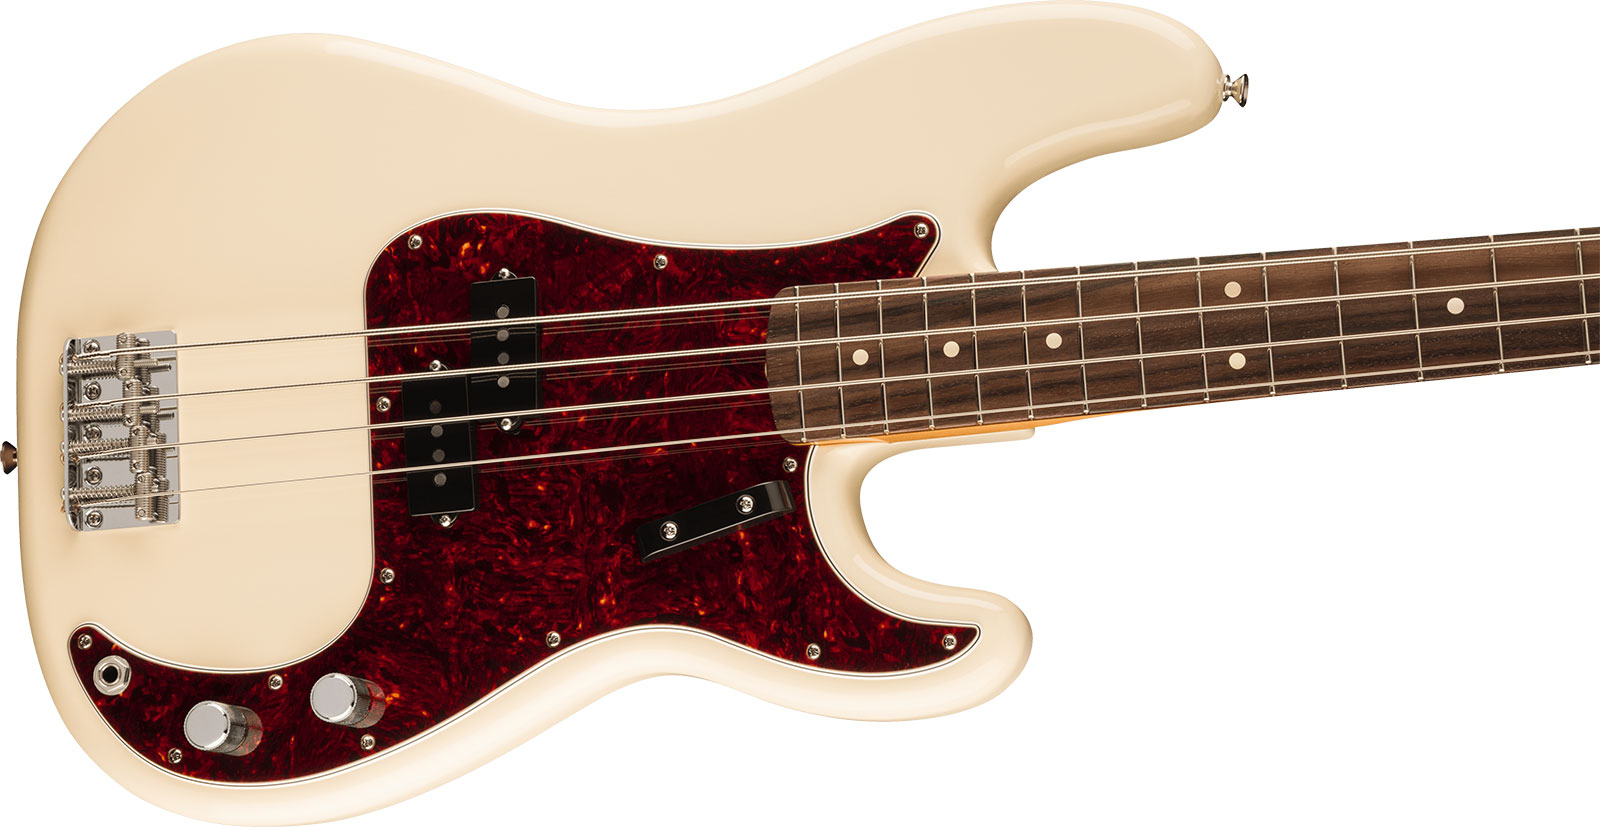 Fender Precision Bass 60s Vintera Ii Mex Rw - Olympic White - Solid body electric bass - Variation 2